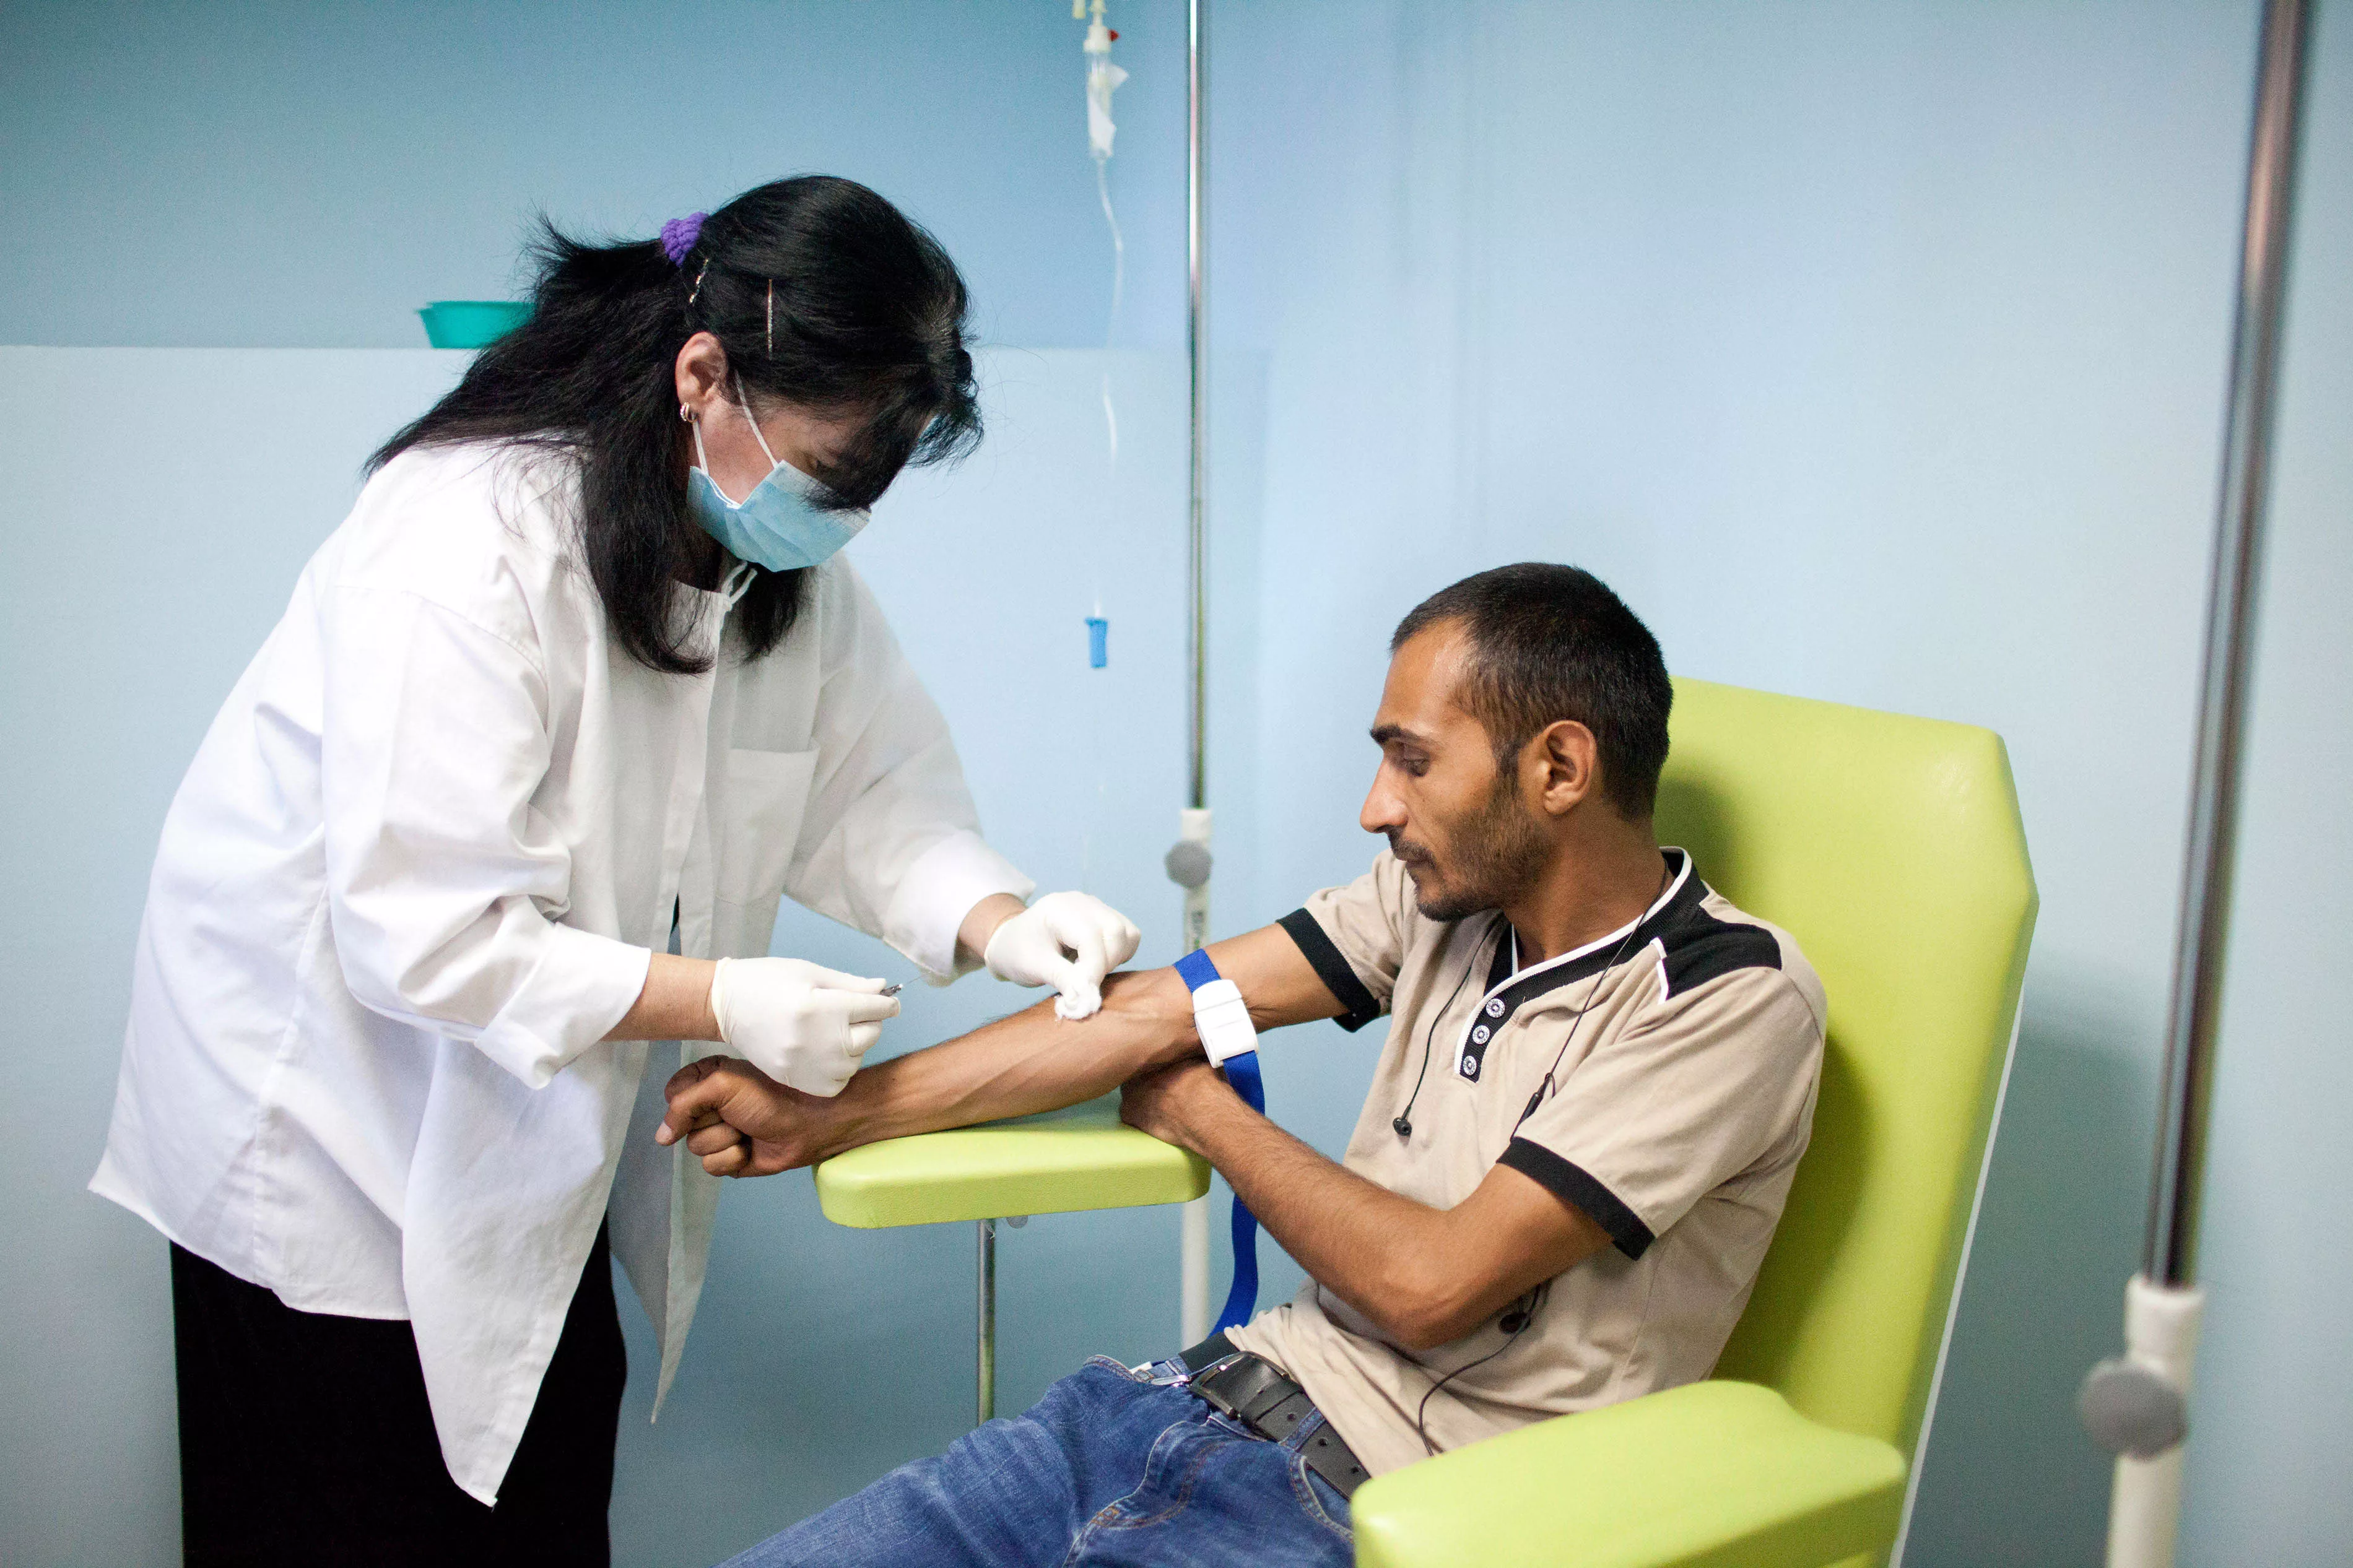 Goderdzi Rajabishvili, an ambulatory patient at the National Centre for Tuberculosis and Lung Disease in Georgia’s capital, Tbilisi, receives his twice-daily infusion of imipenem, an antibiotic used to treat MDR-TB. 